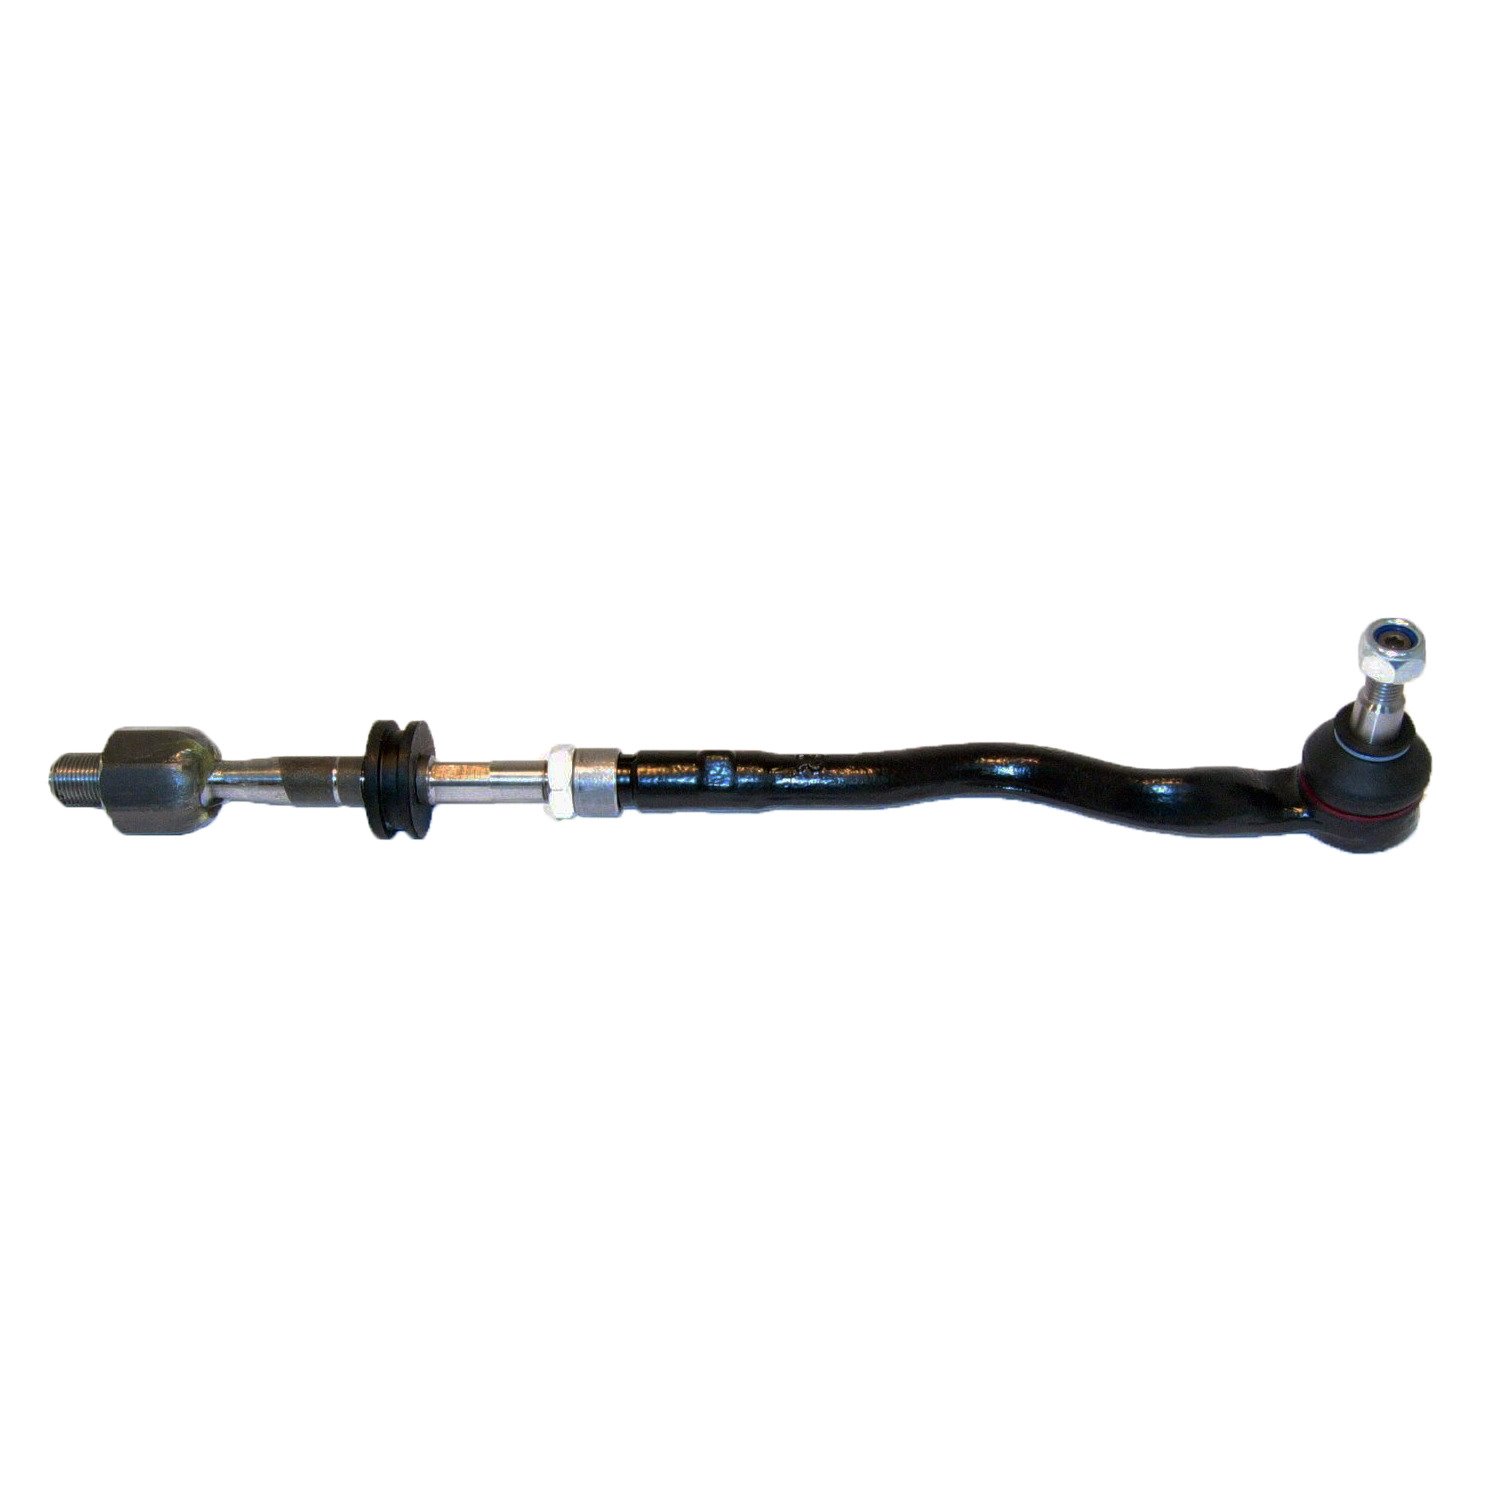 Tie Rod End Assembly